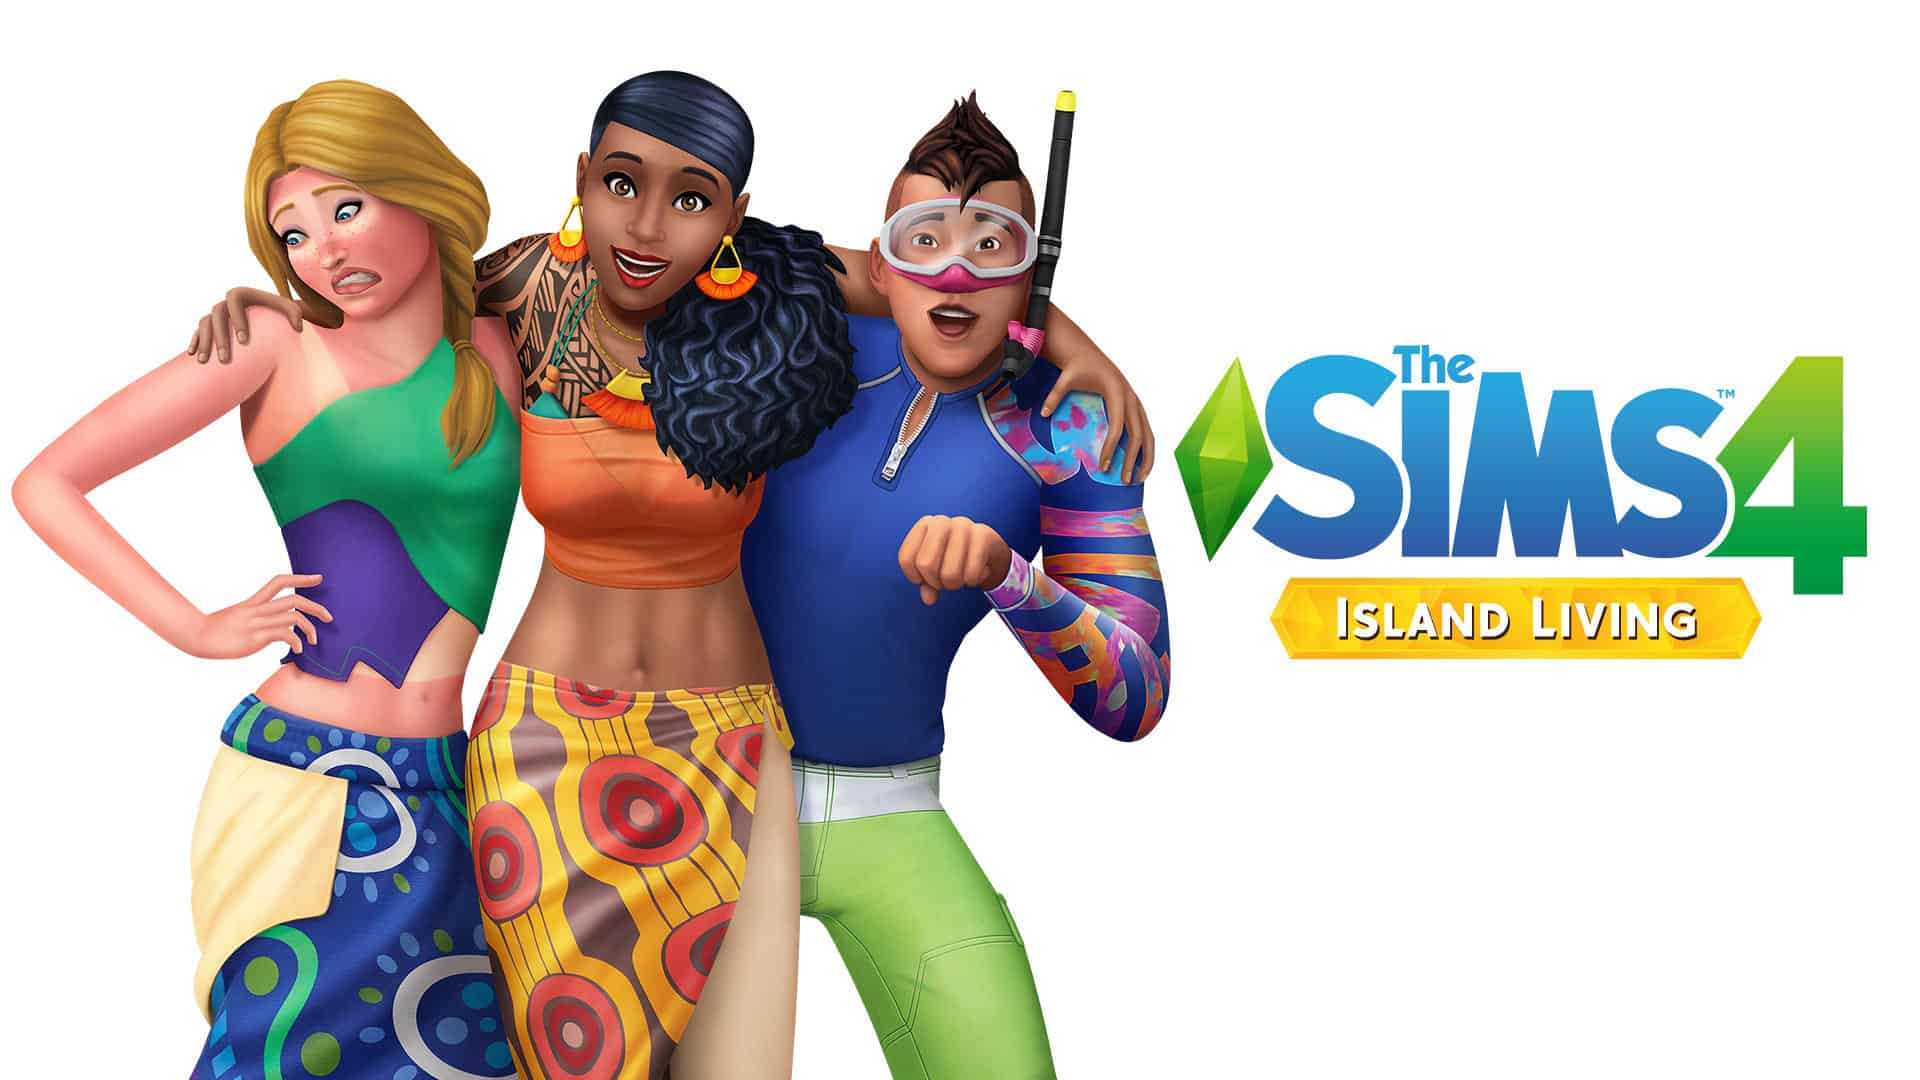 The Sims 4: Island Living – Escape the Ordinary and Enjoy a Laid-Back Lifestyle in Sulani